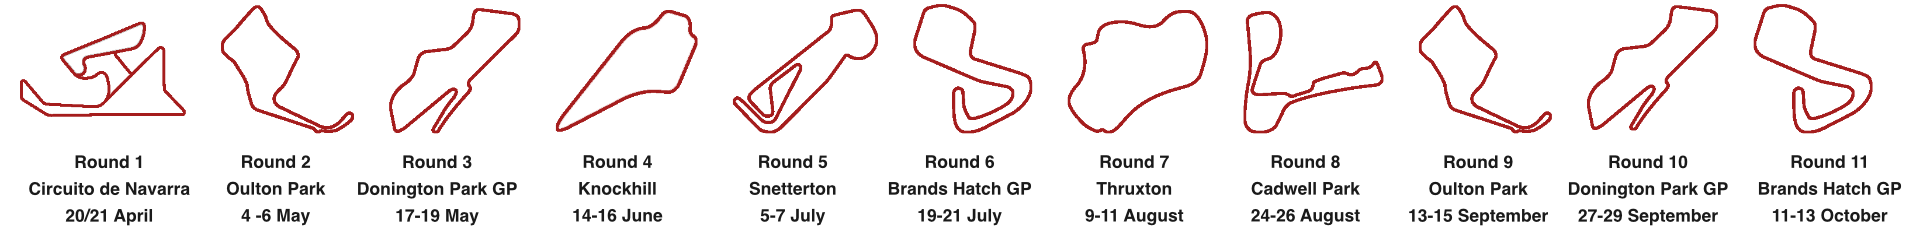 BSB rounds 2024